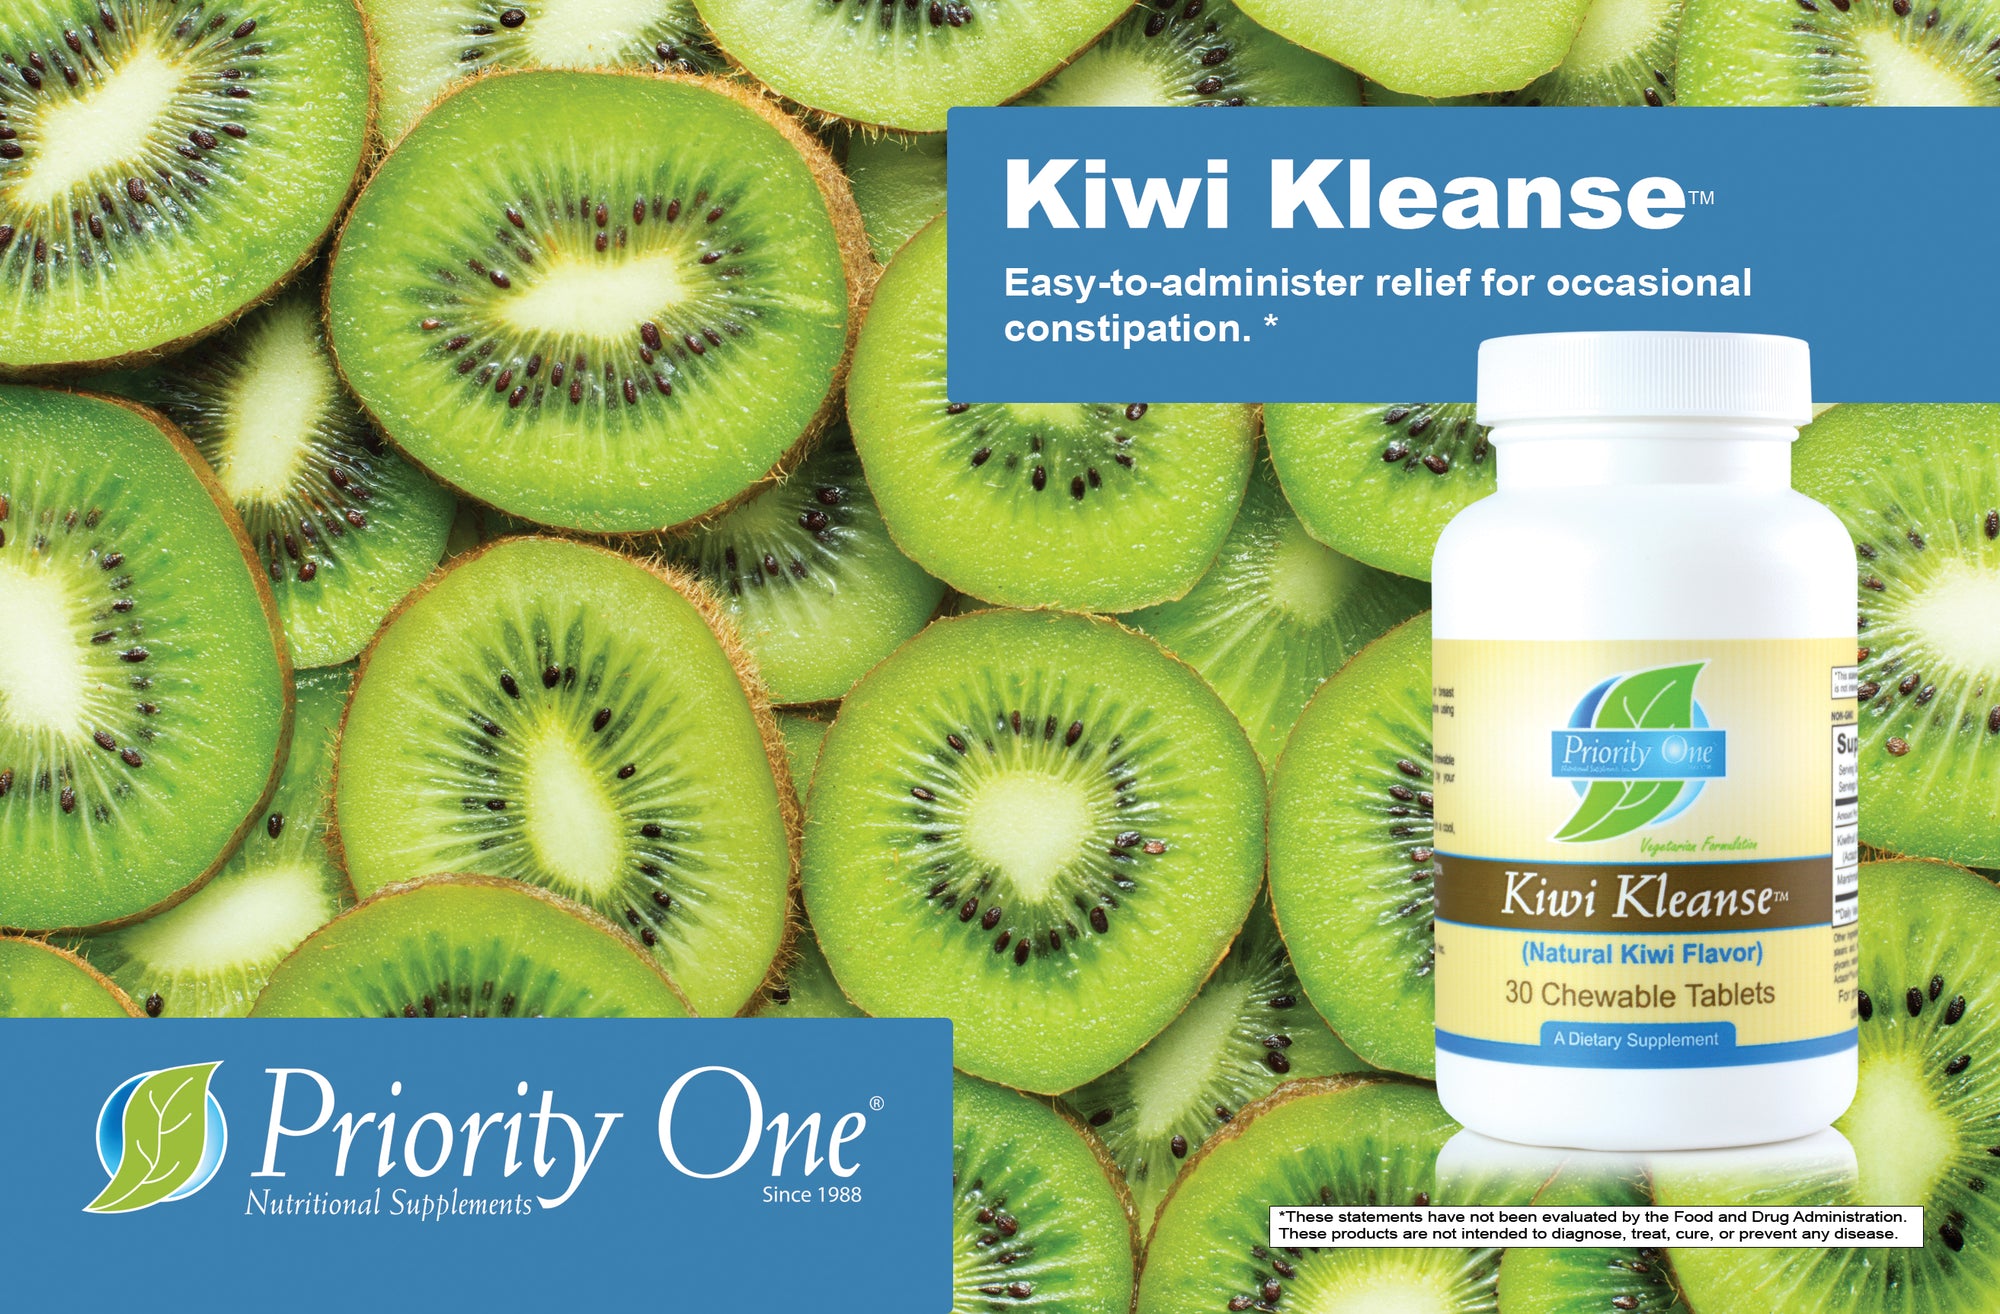 Kiwi Kleanse (30 Chewable Tablets) Kiwi Kleanse are chewable constipation tablets. They are easy to administer for occasional constipation relief.*